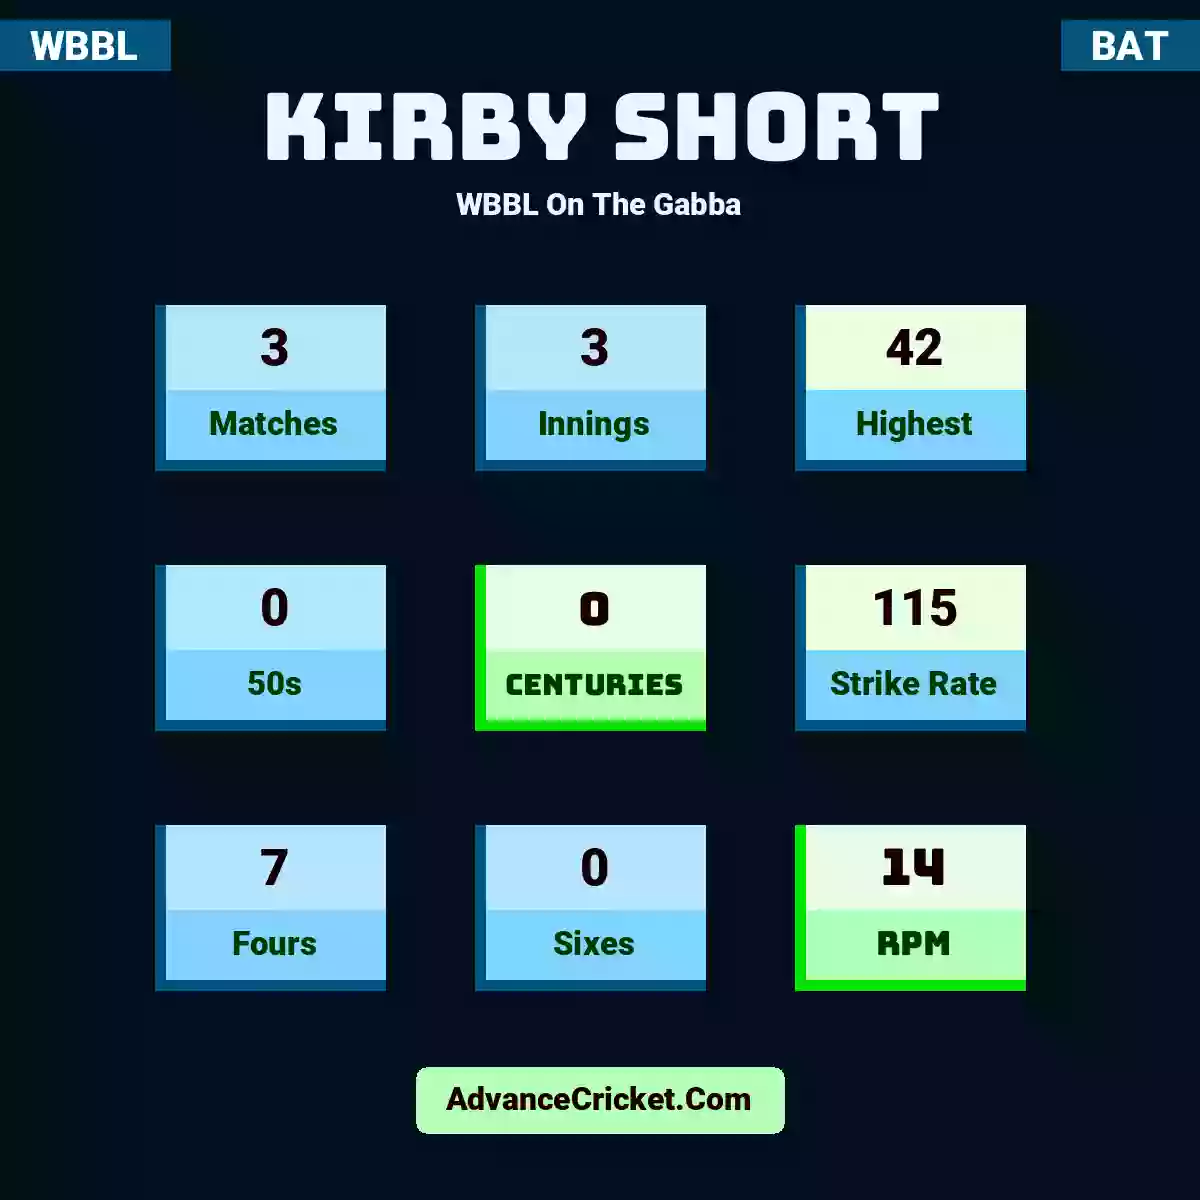 Kirby Short WBBL  On The Gabba, Kirby Short played 3 matches, scored 42 runs as highest, 0 half-centuries, and 0 centuries, with a strike rate of 115. K.Short hit 7 fours and 0 sixes, with an RPM of 14.